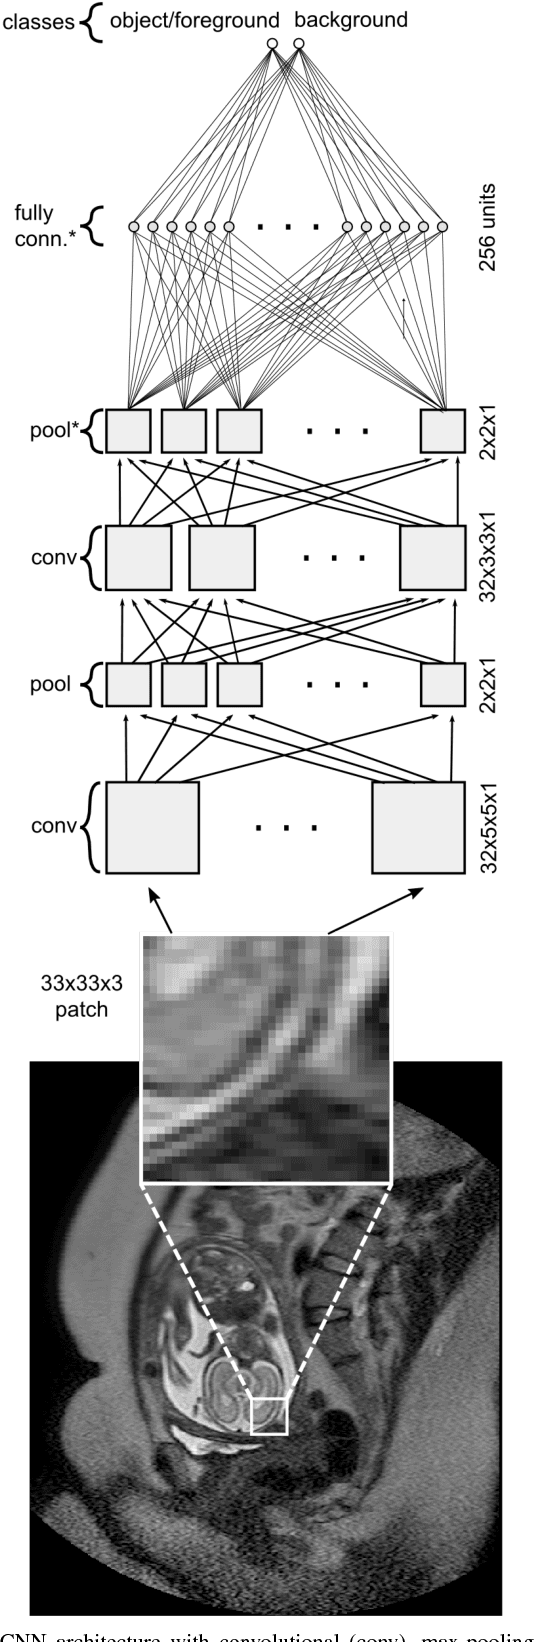 Figure 1 for DeepCut: Object Segmentation from Bounding Box Annotations using Convolutional Neural Networks